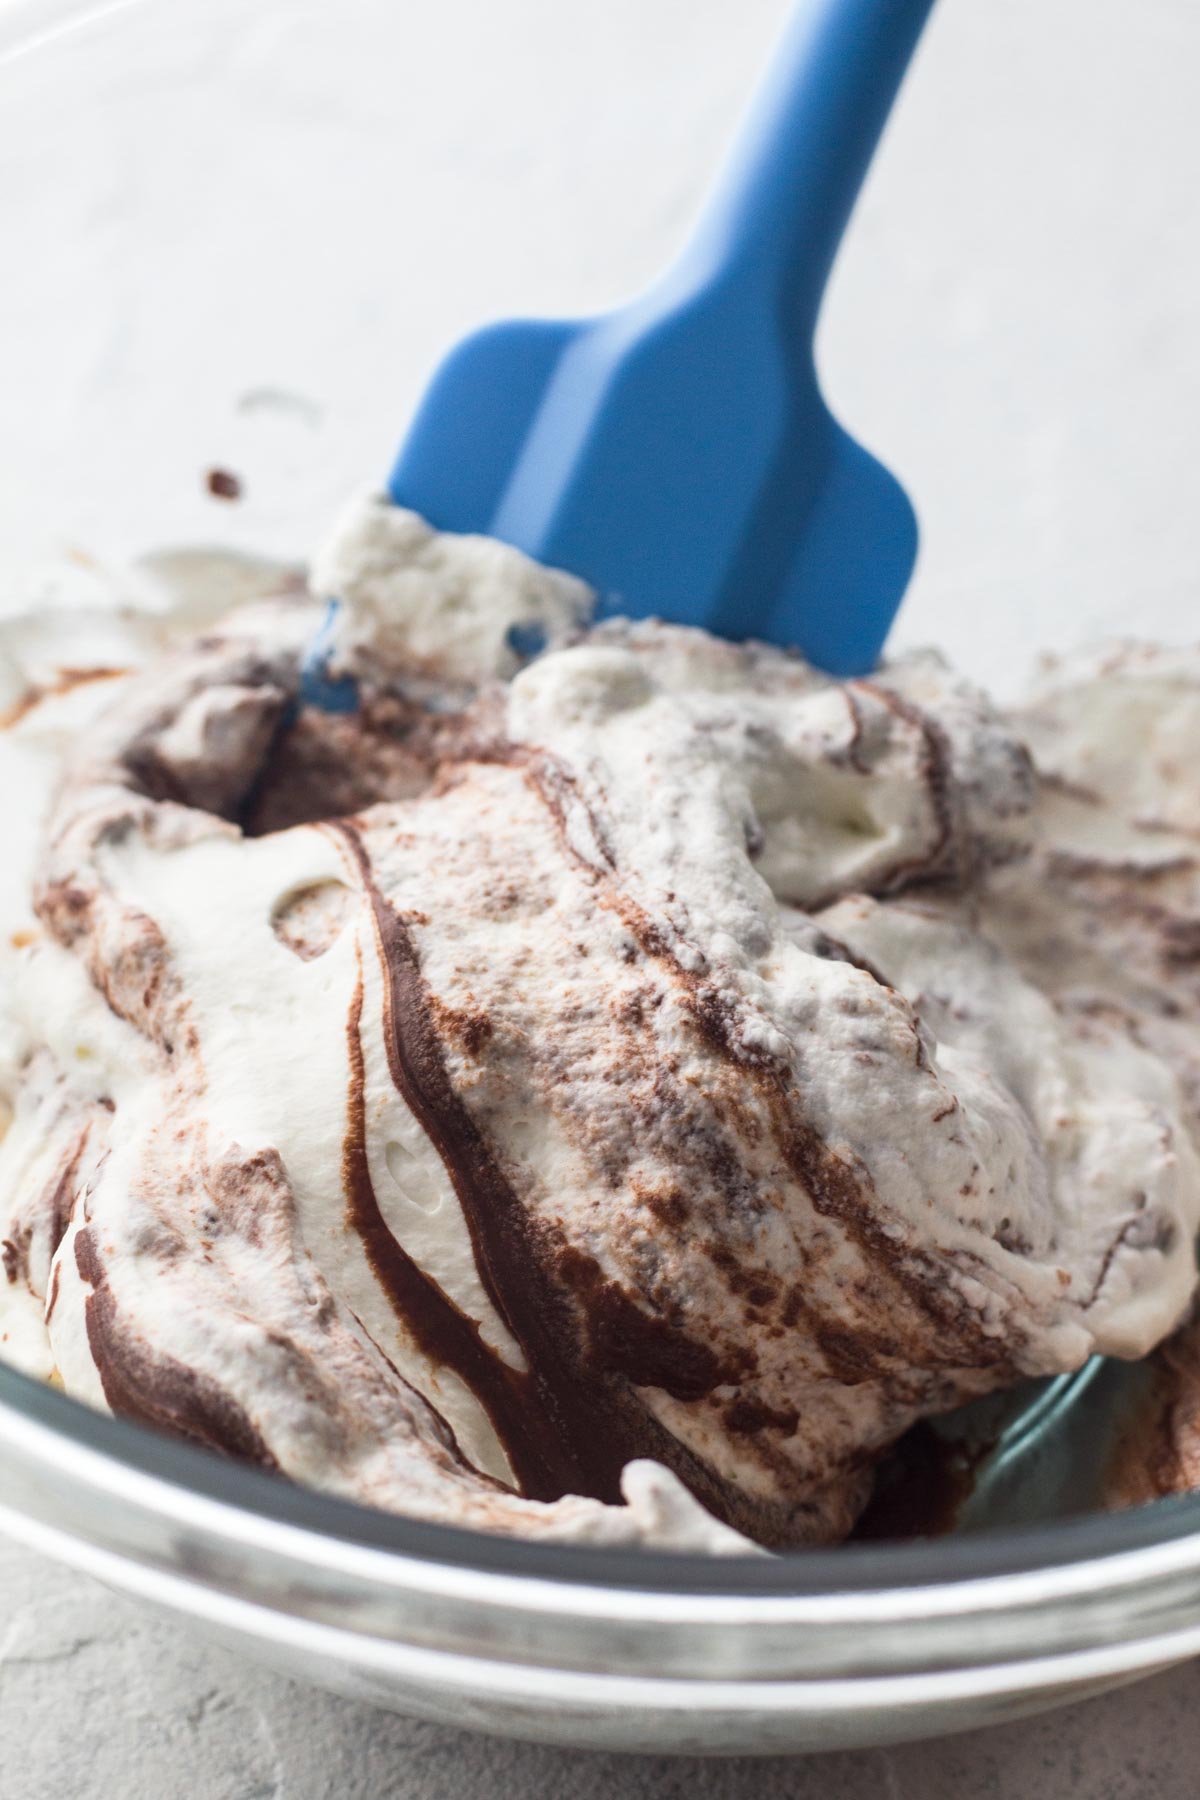 Whipped cream and melted chocolate being folded together in a glass bowl with a blue rubber spatula.